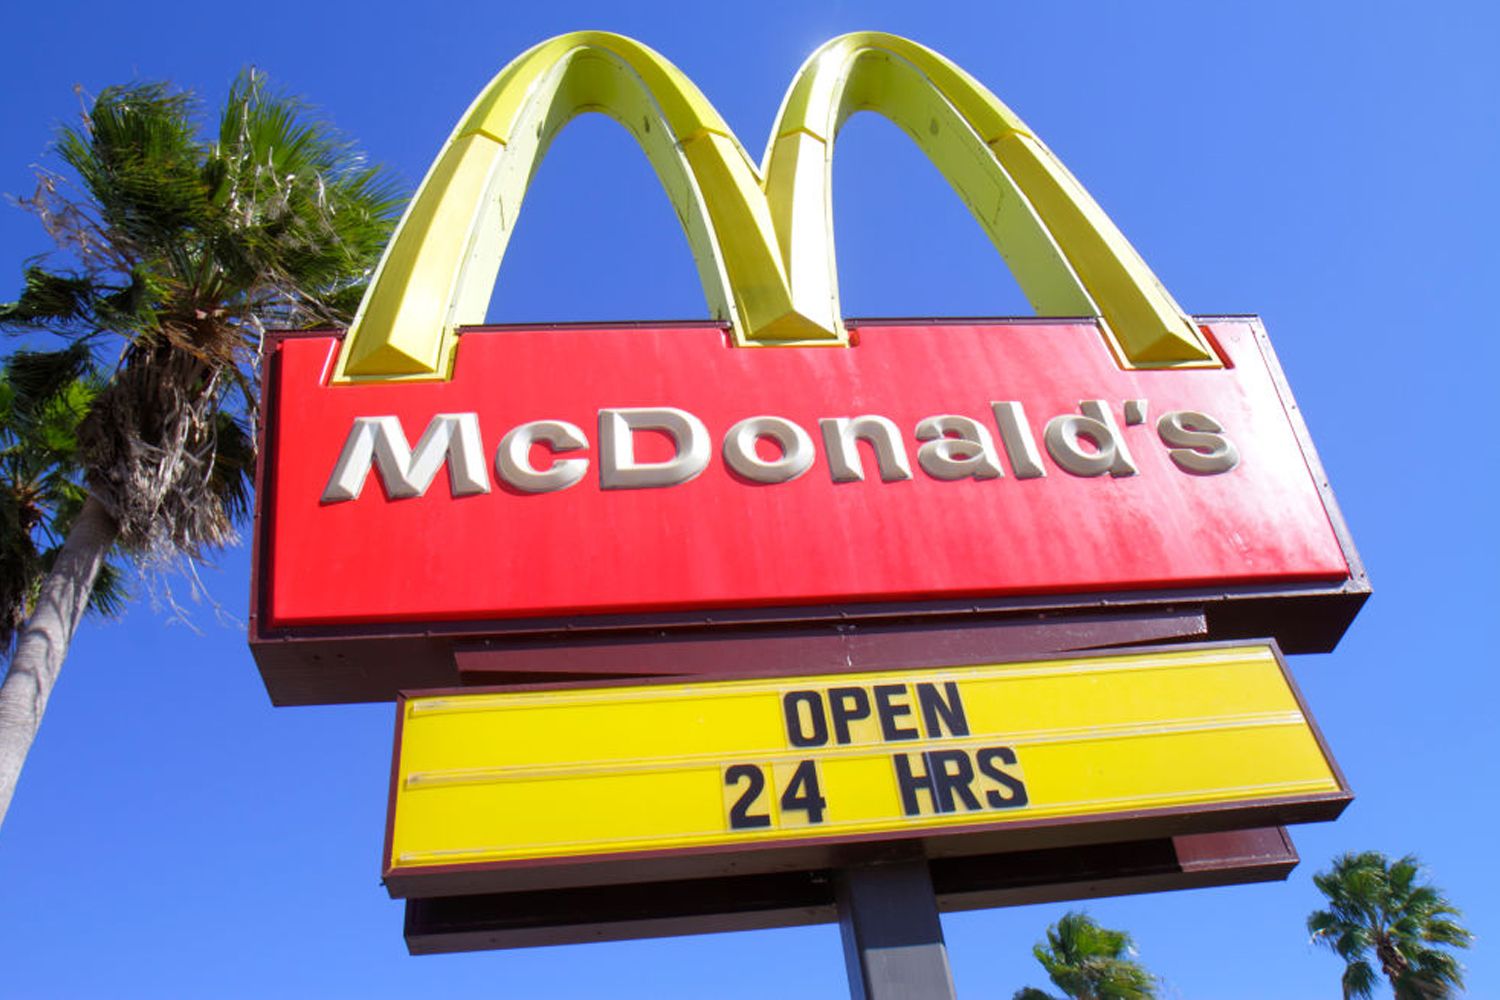 McDonald’s Expands Relationship With Omnicom Media Group, Signing Content Collective as Entertainment AOR